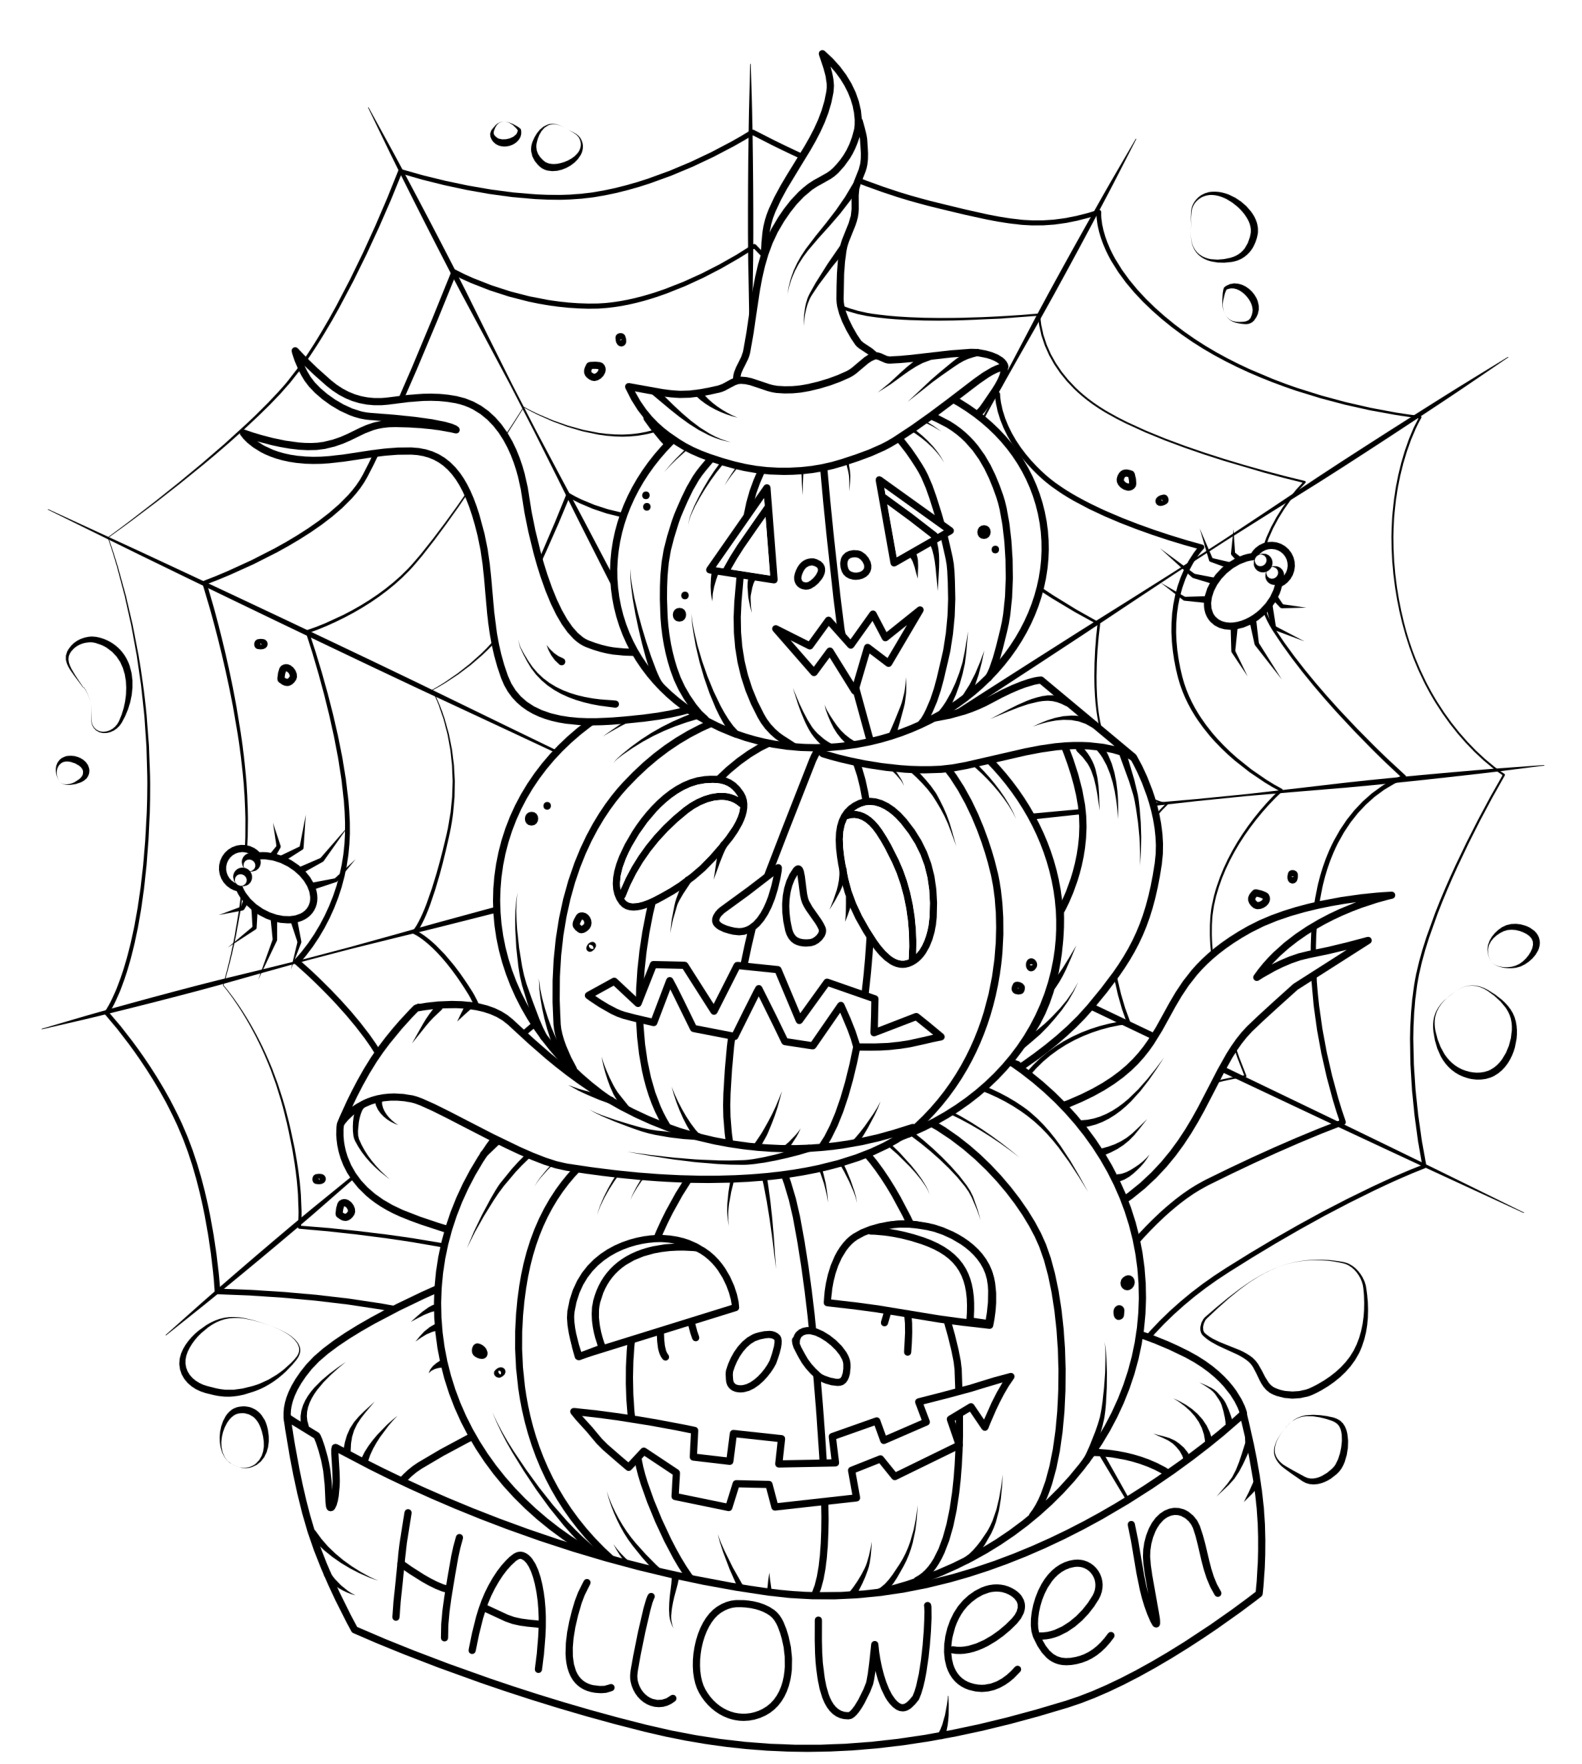 Pumpkin Scary Pile Of Pumpkins Spiders Web Coloring Page